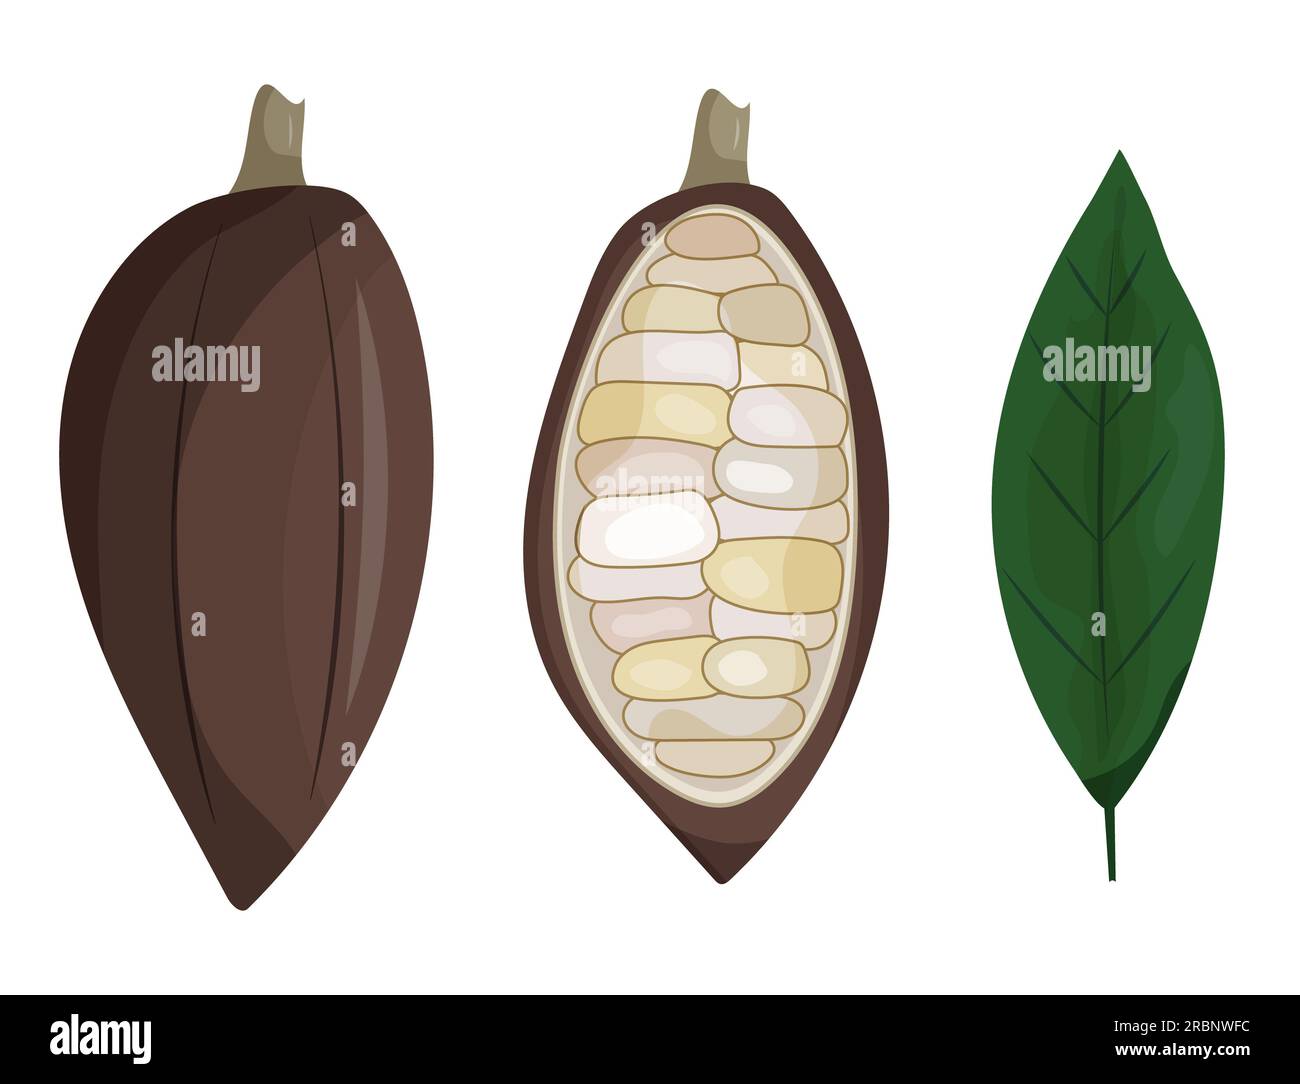 Set of cocoa beans illustration. Logo template. Cacao pod. composition and elements. Vector clipart Stock Photo